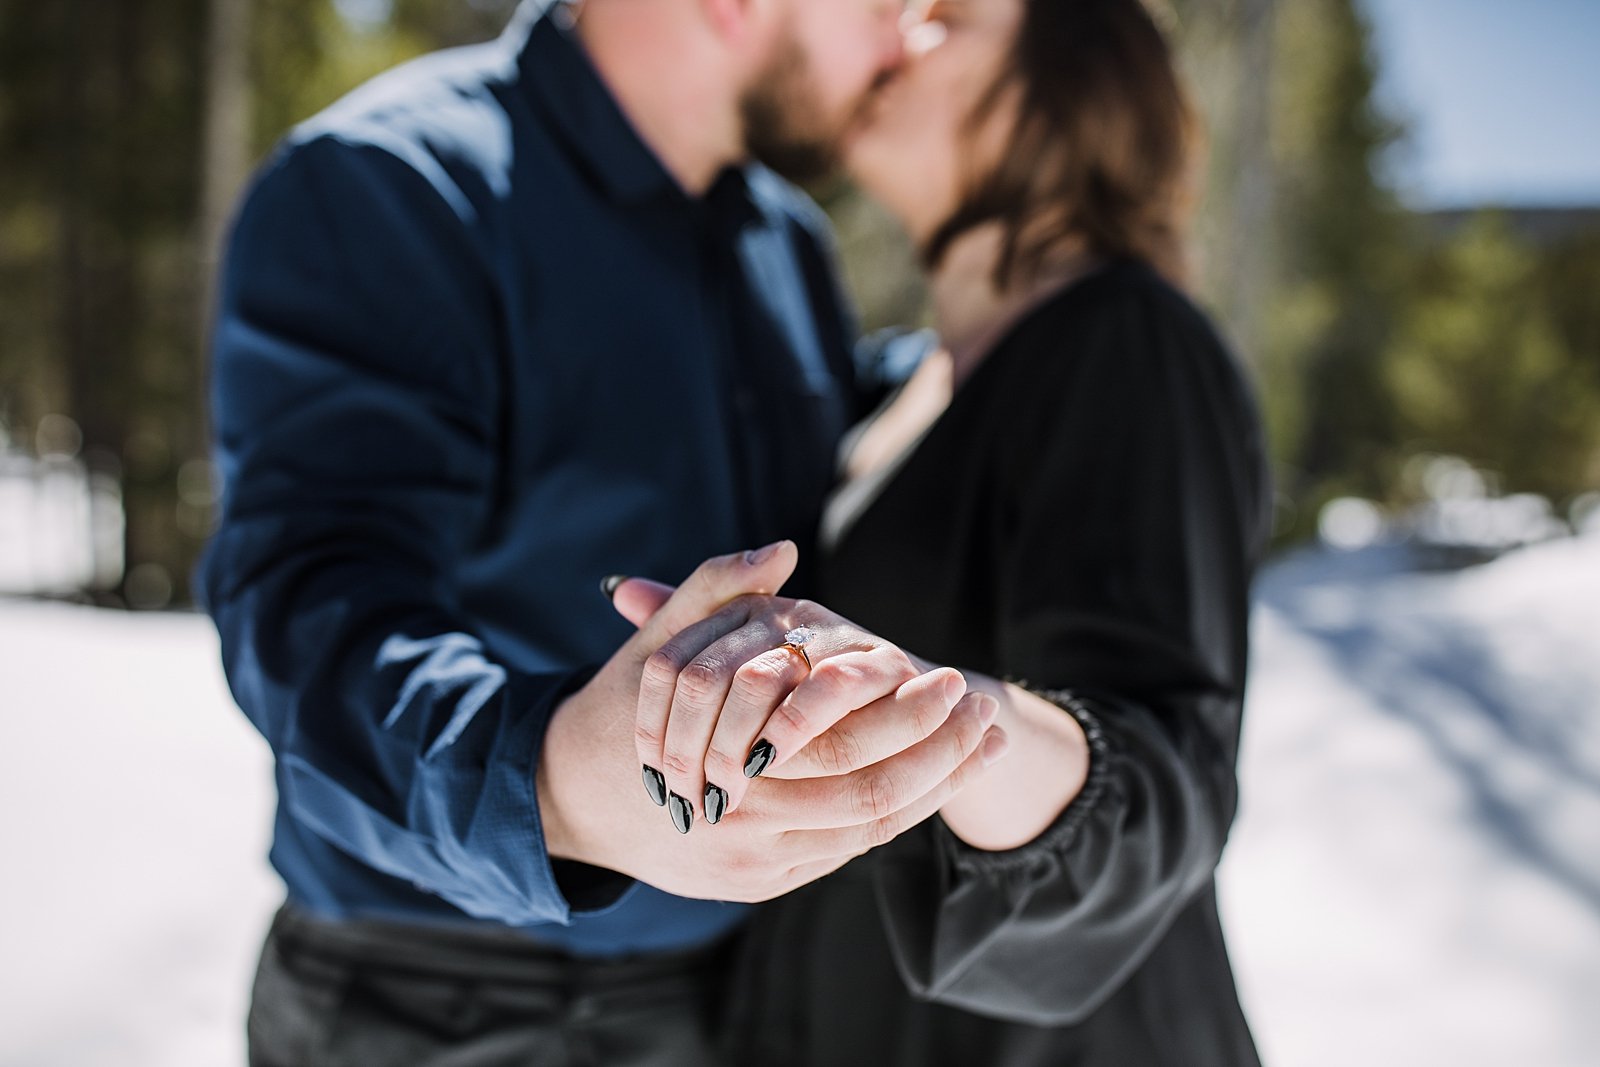 couple kissing and showing off engagement ring, black engagement nails, black proposal nails, engagement ring posing, georgia pass engagements, georgia pass proposal, snowmobile proposal